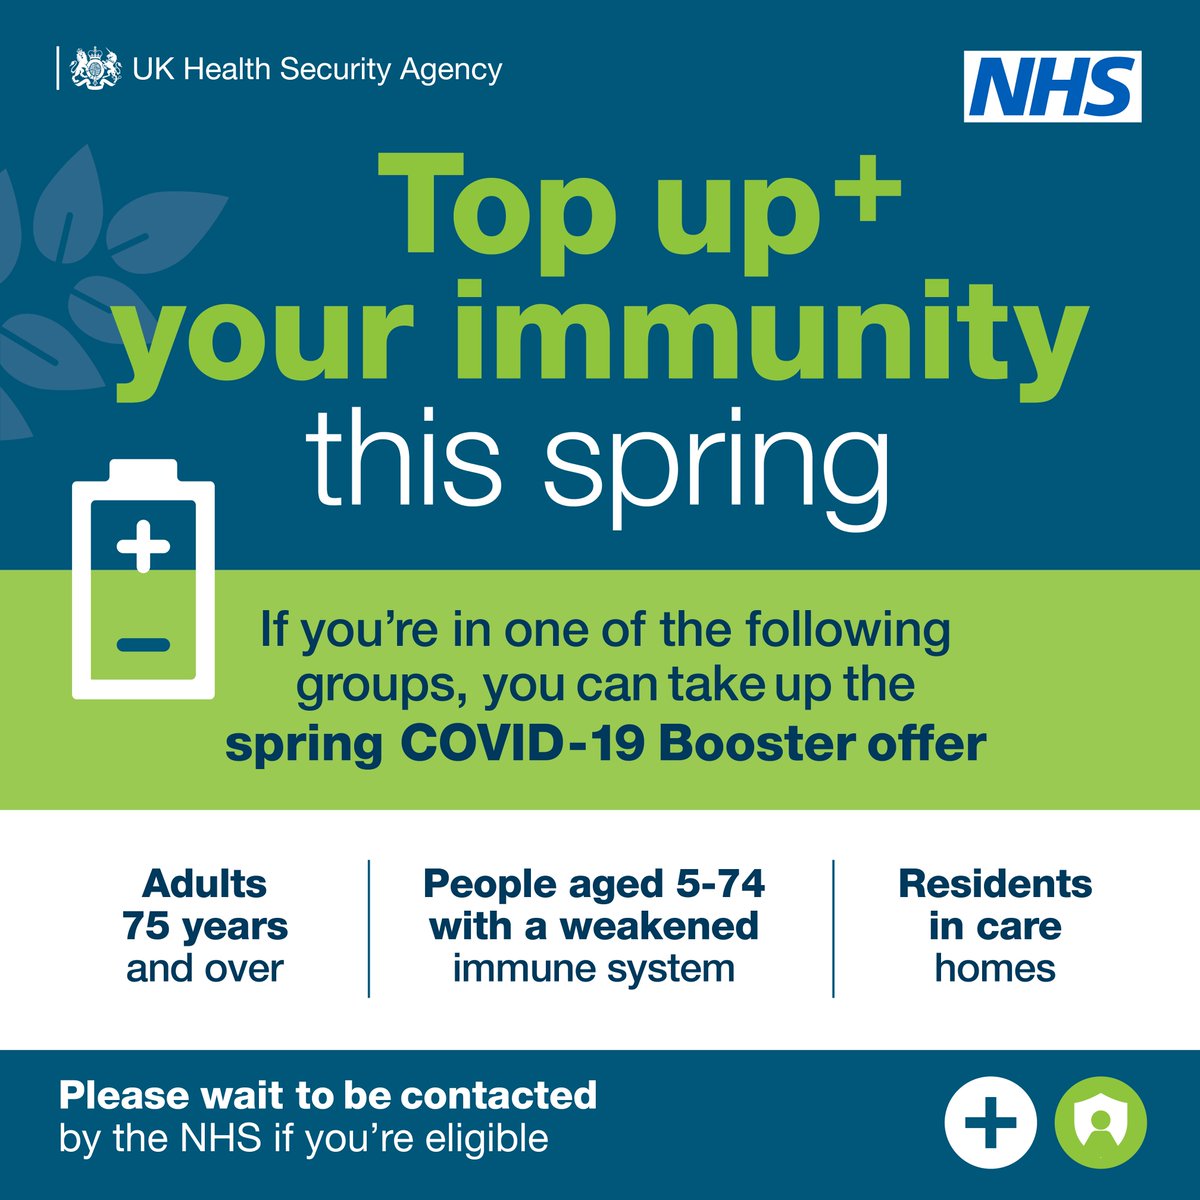 Covid-19 vaccines have saved countless lives, but the virus is still with us and making thousands of people ill every week. So, this spring, the NHS is offering a further vaccination to those at highest risk of severe illness from Covid.